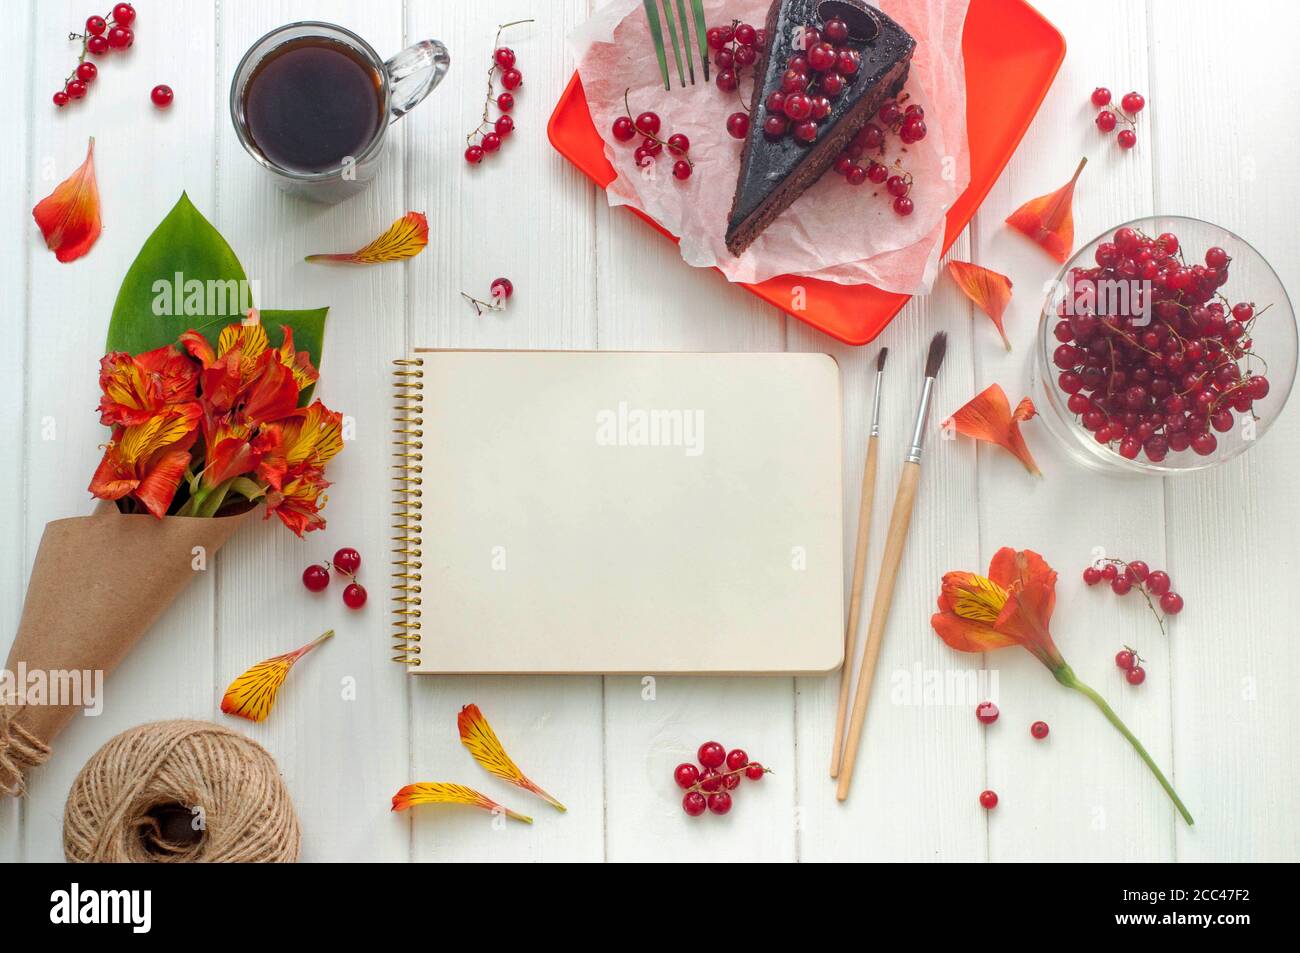 Open empty notebook with cup of coffee, red current cake slice, brushes and bouquet of flowers on the white wooden background, copy space. Top view. Stock Photo